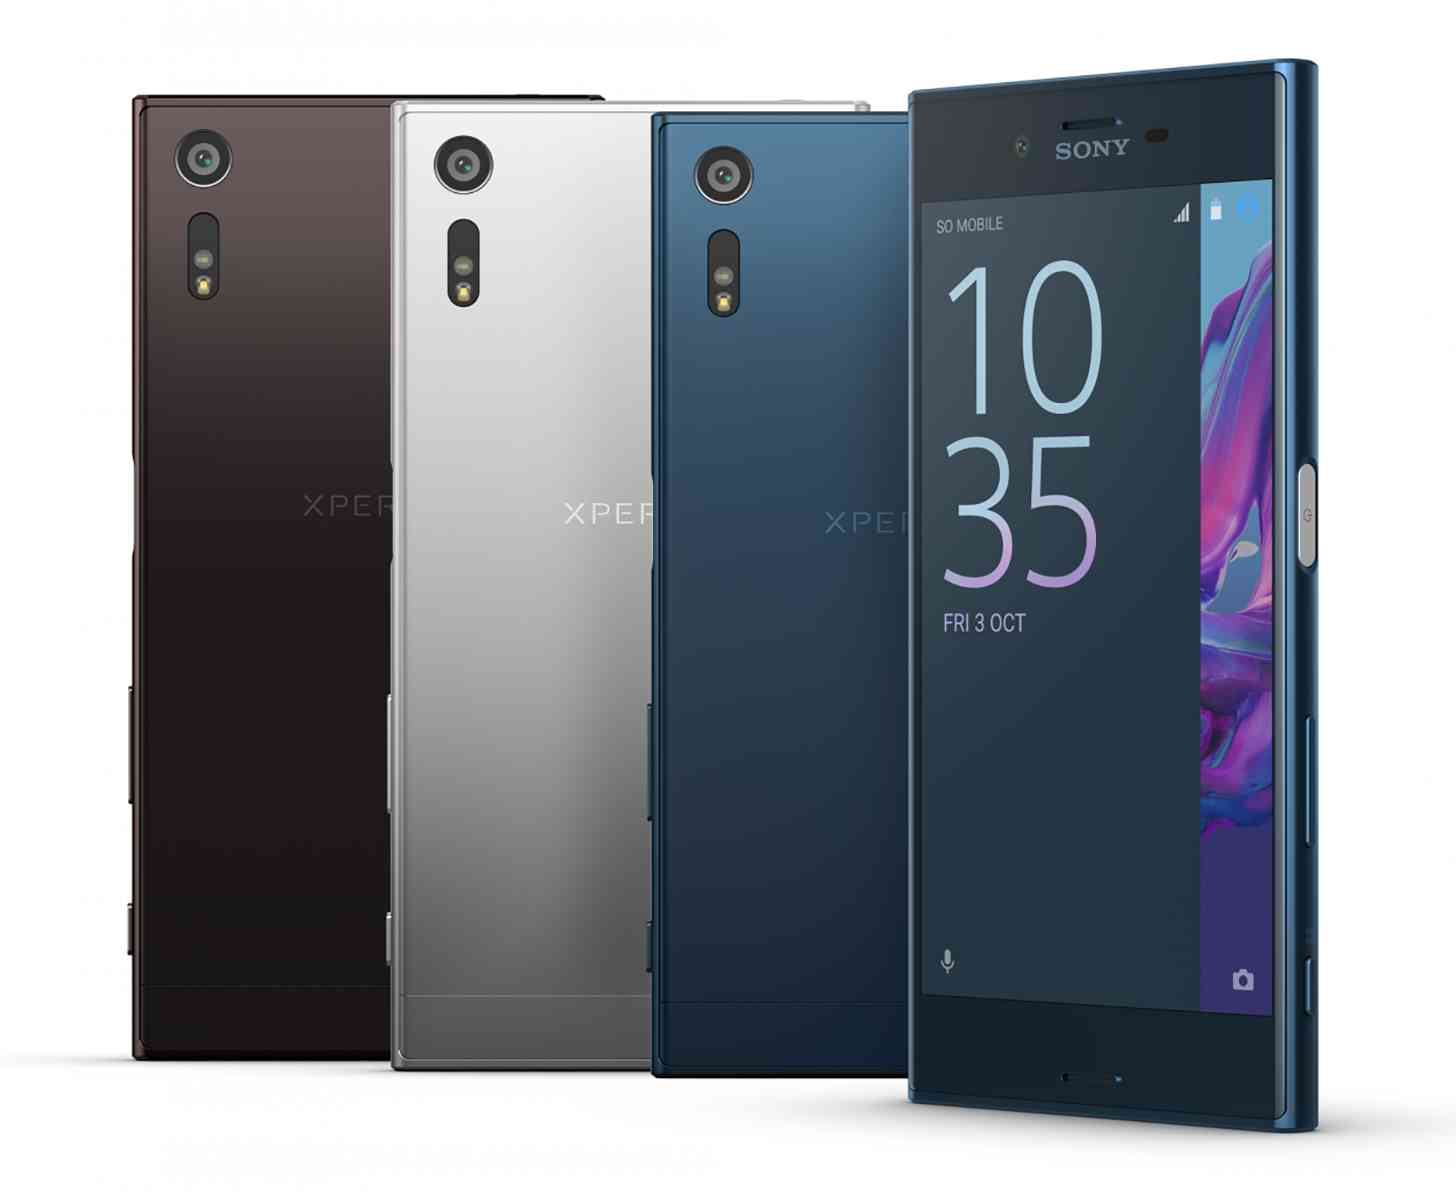 Sony Xperia XZ official colors